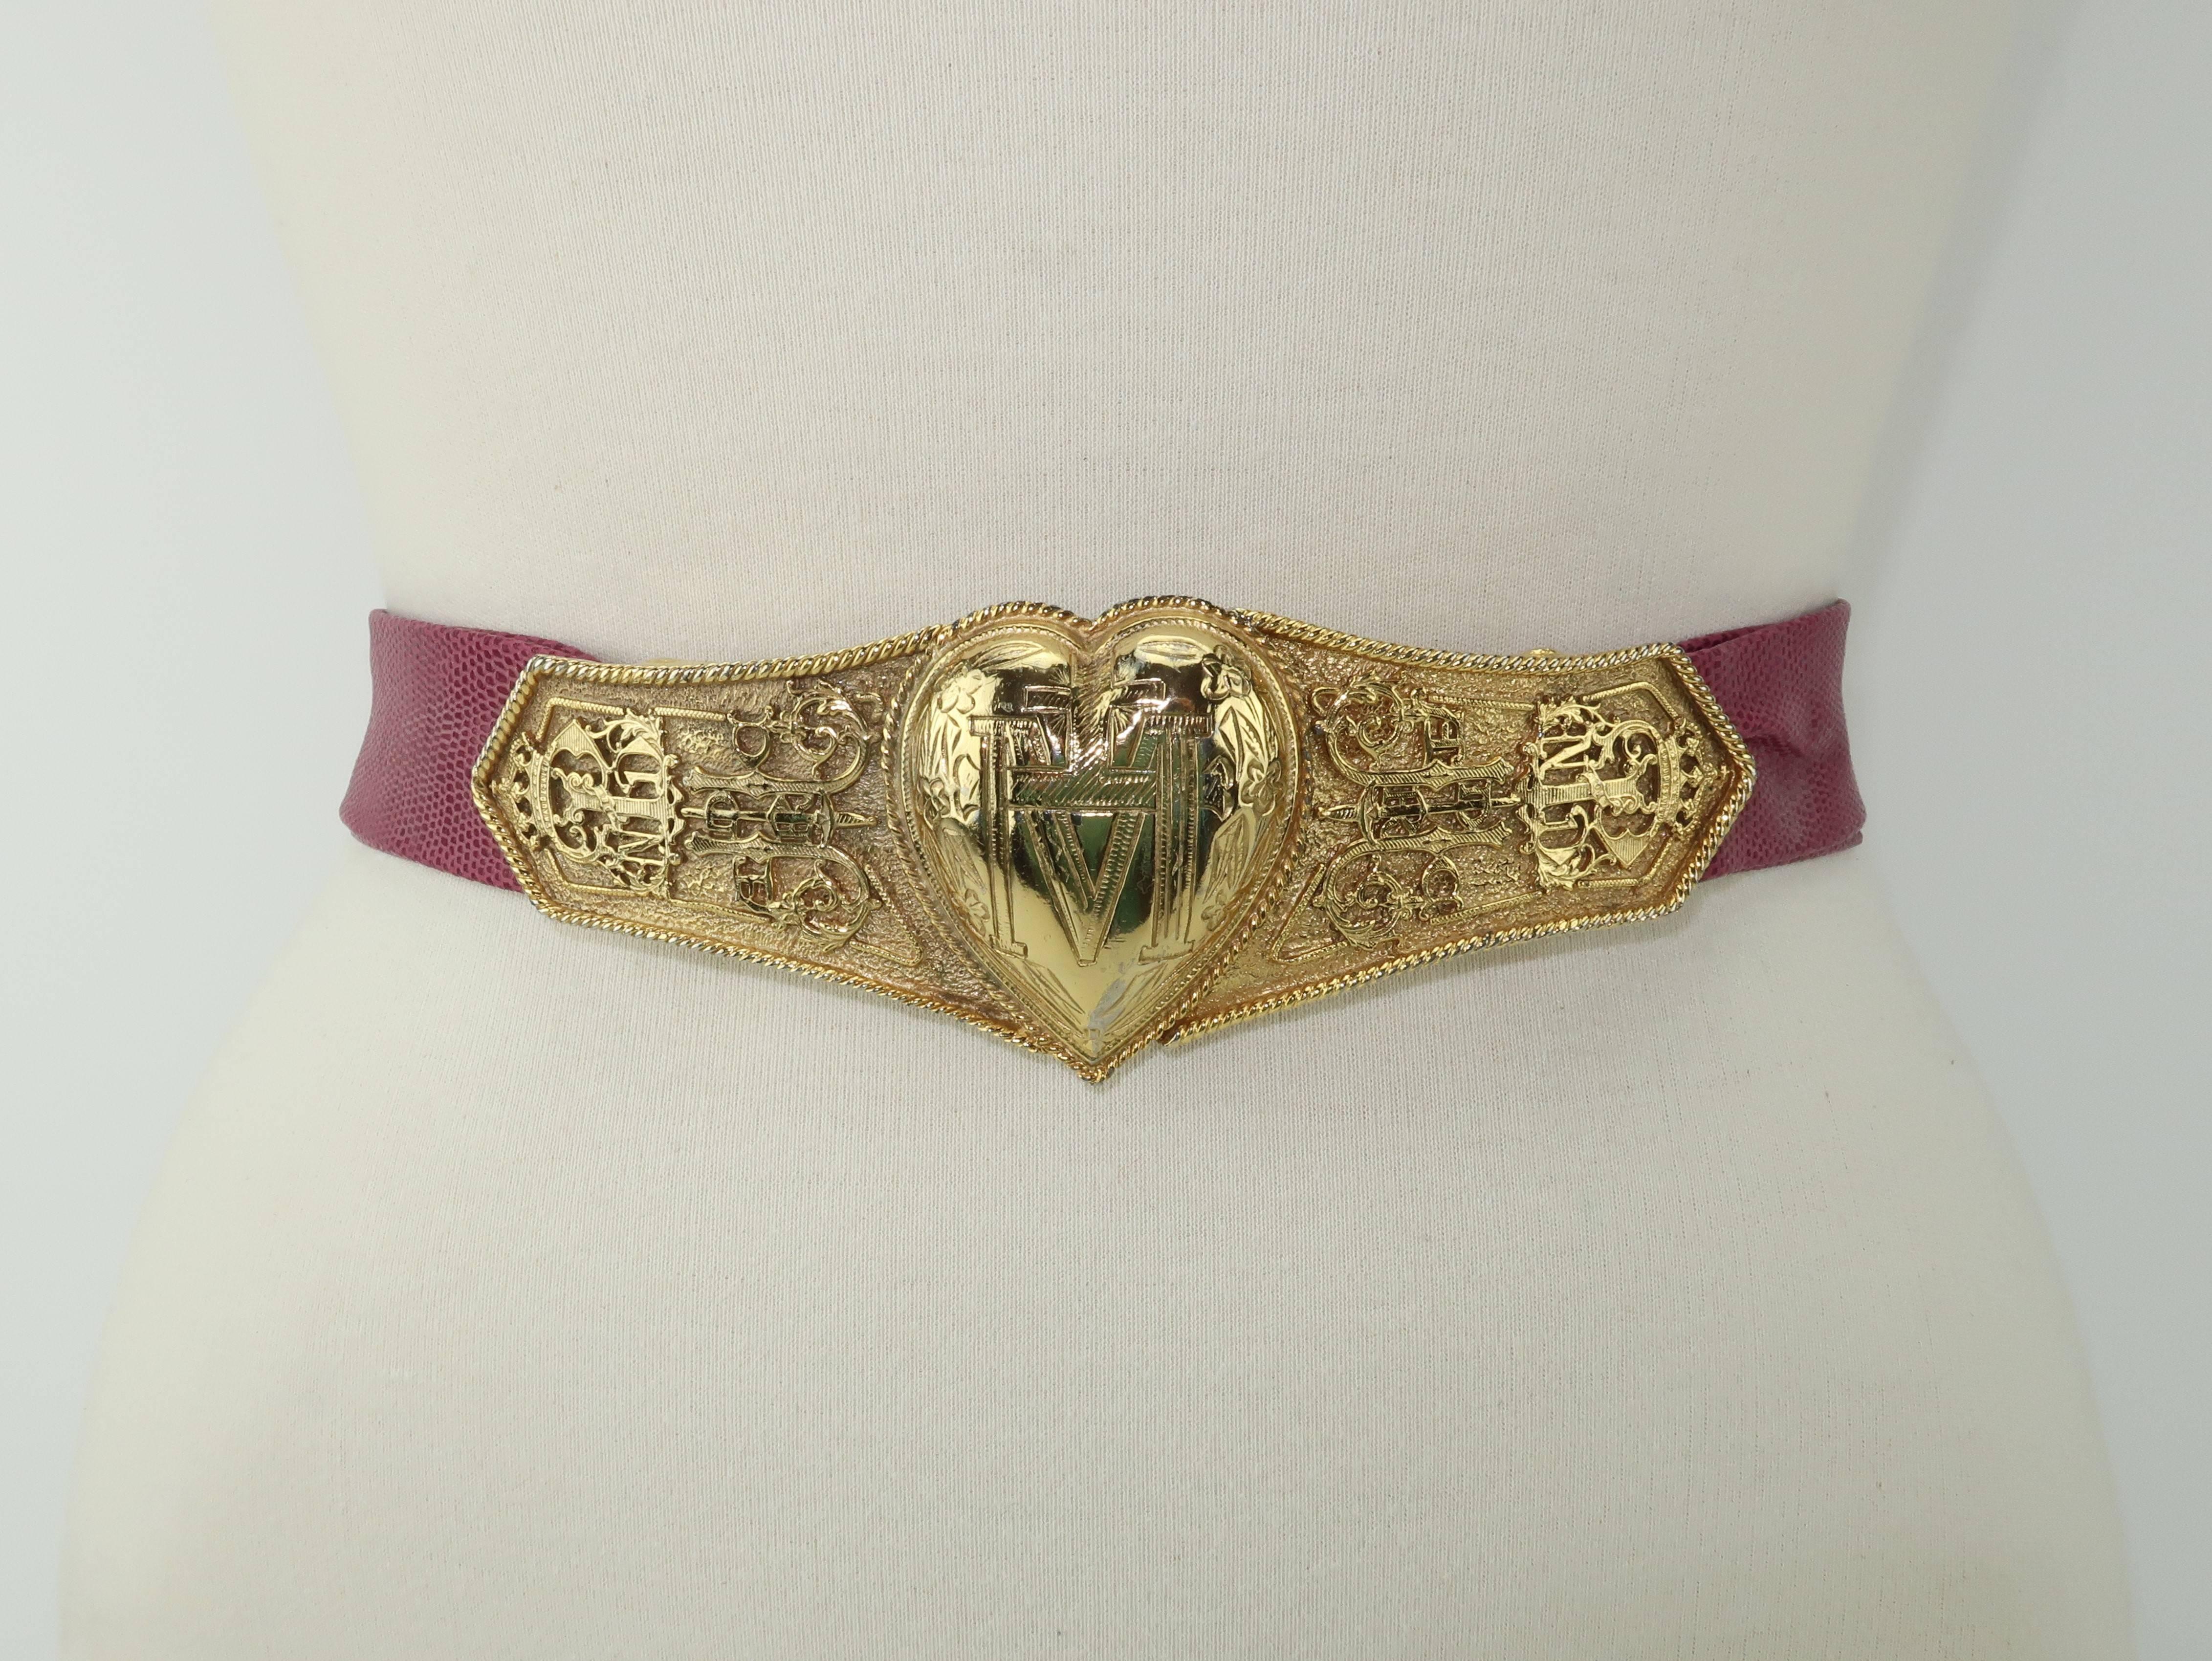 Exceptional!  This C.1980 Accessocraft NYC belt buckle depicts a heart flanked by medieval style symbols including a reference to the French heroine, Joan of Arc, and the French village, Chaudes-Aigues.  Whatever the meaning, the gold tone metal